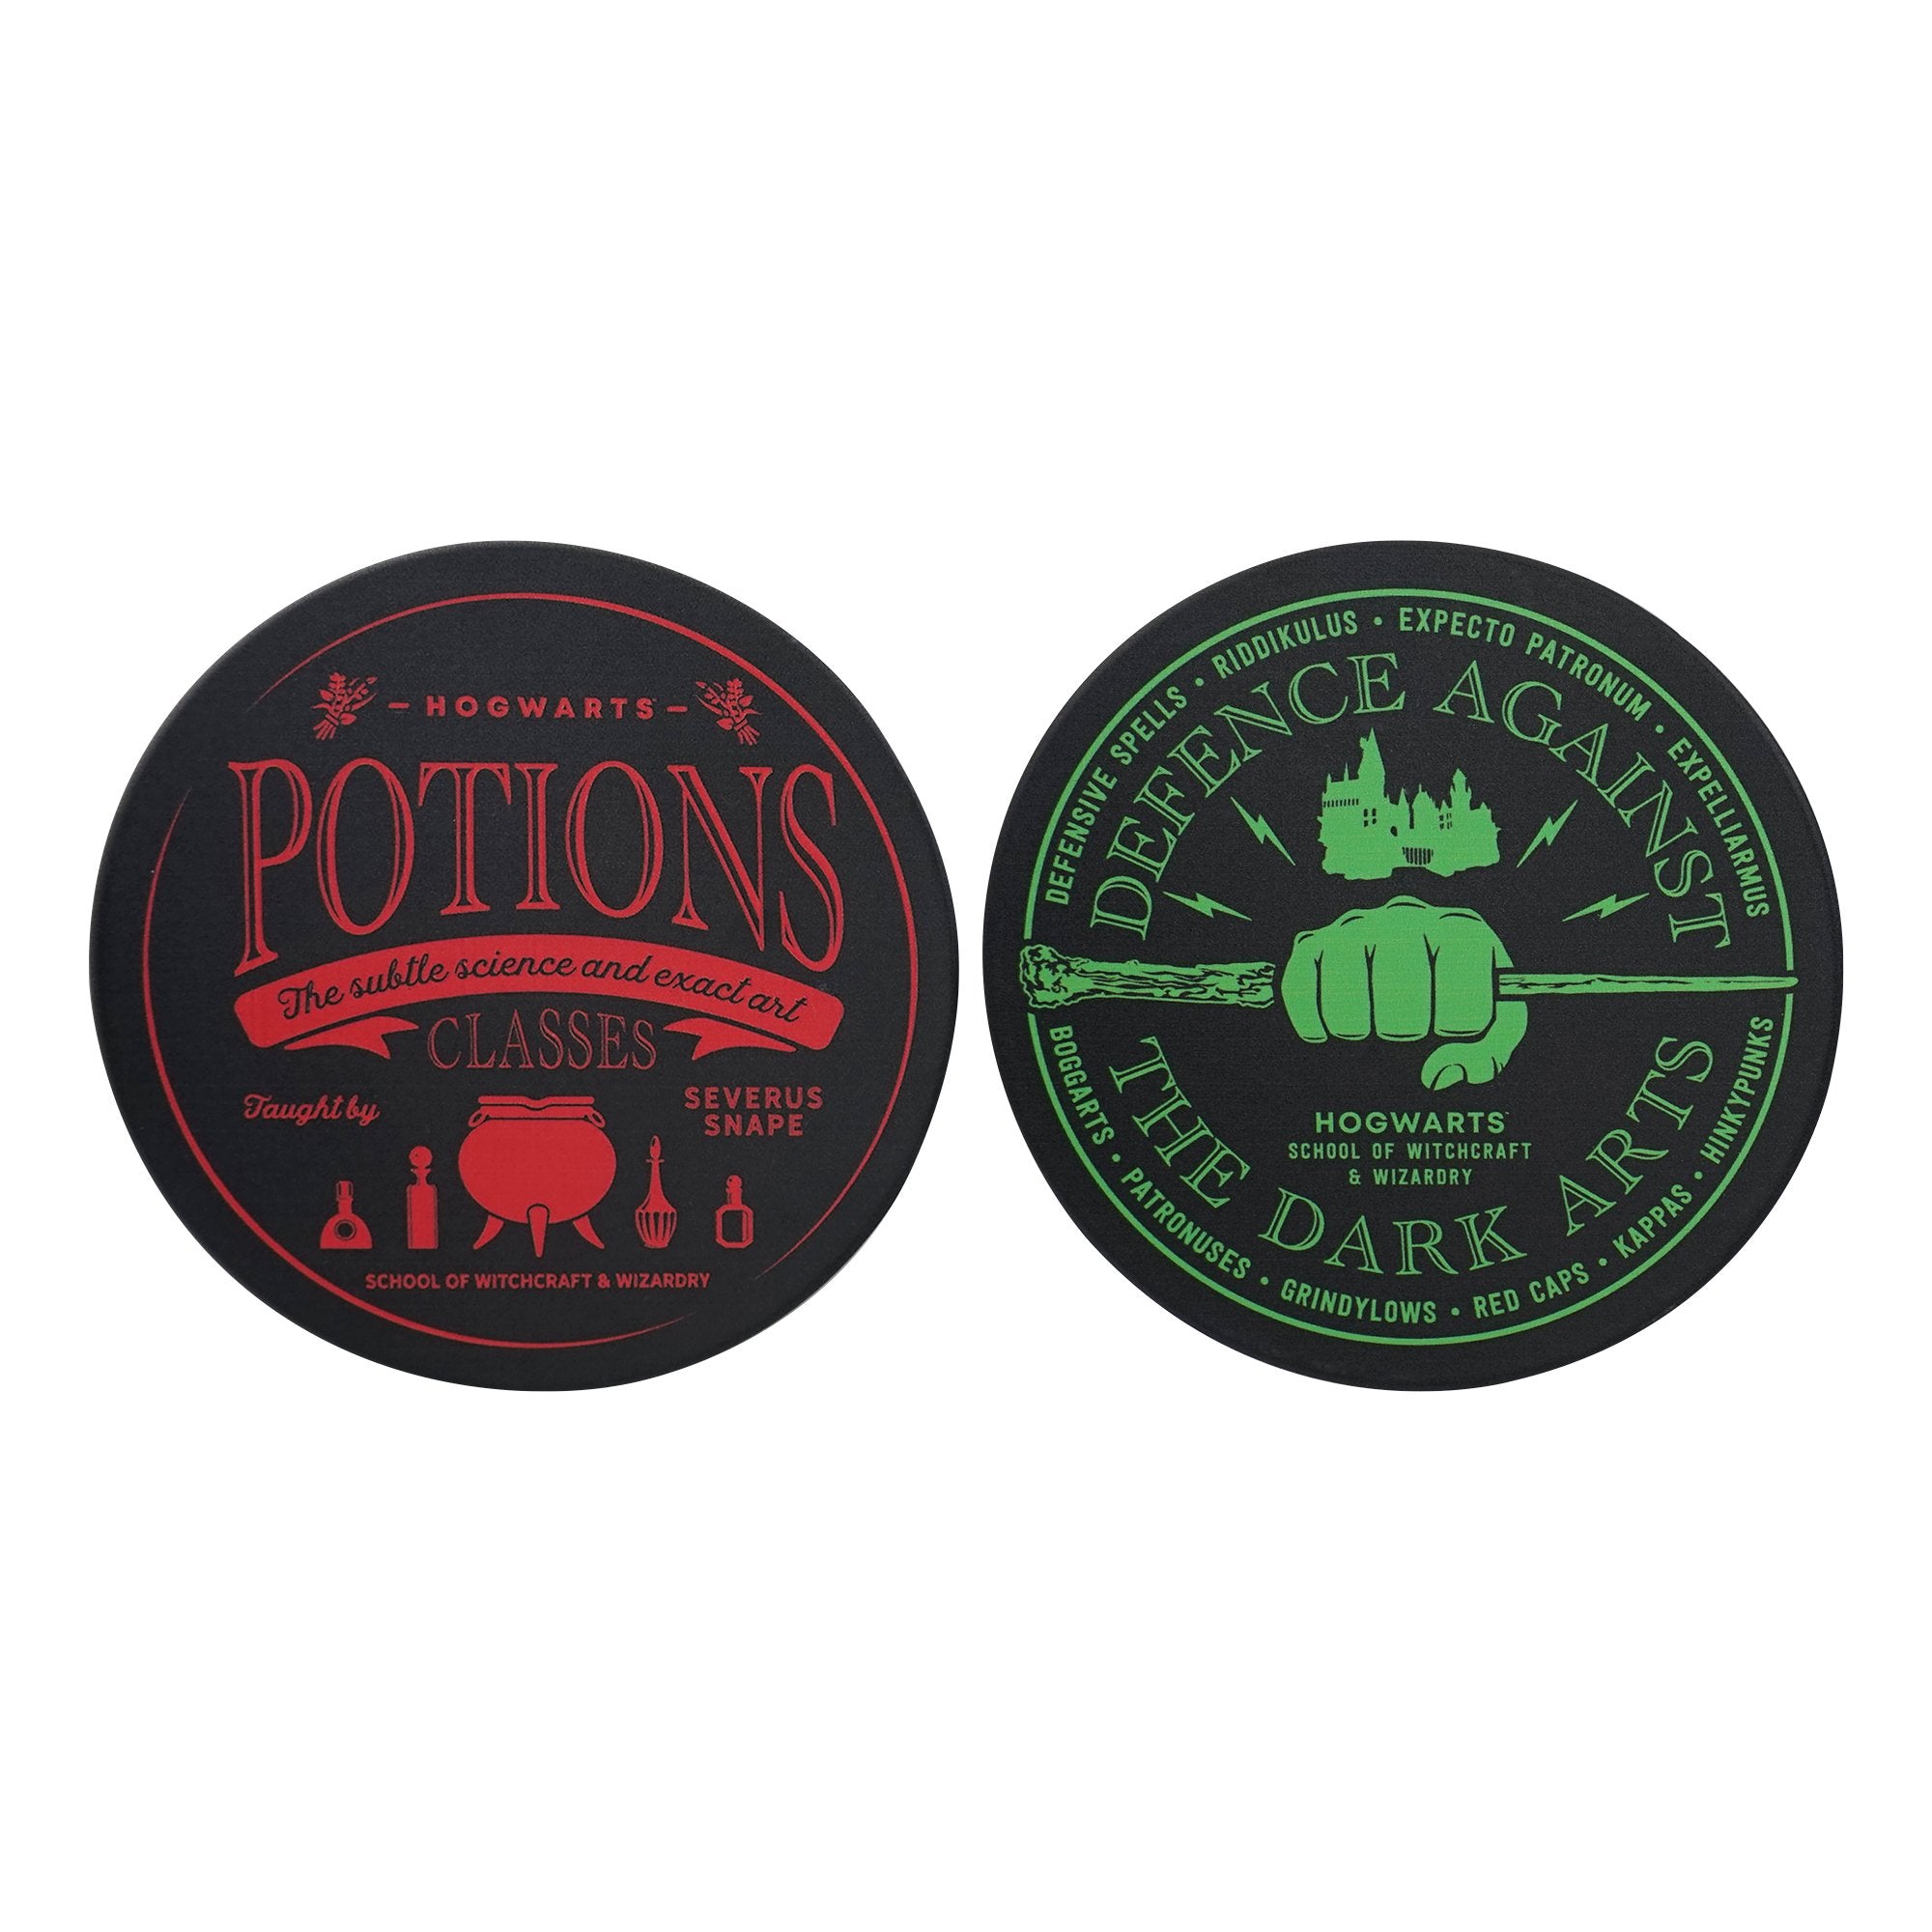 Coasters Set of 2 Ceramic Boxed - Harry Potter (Potions)